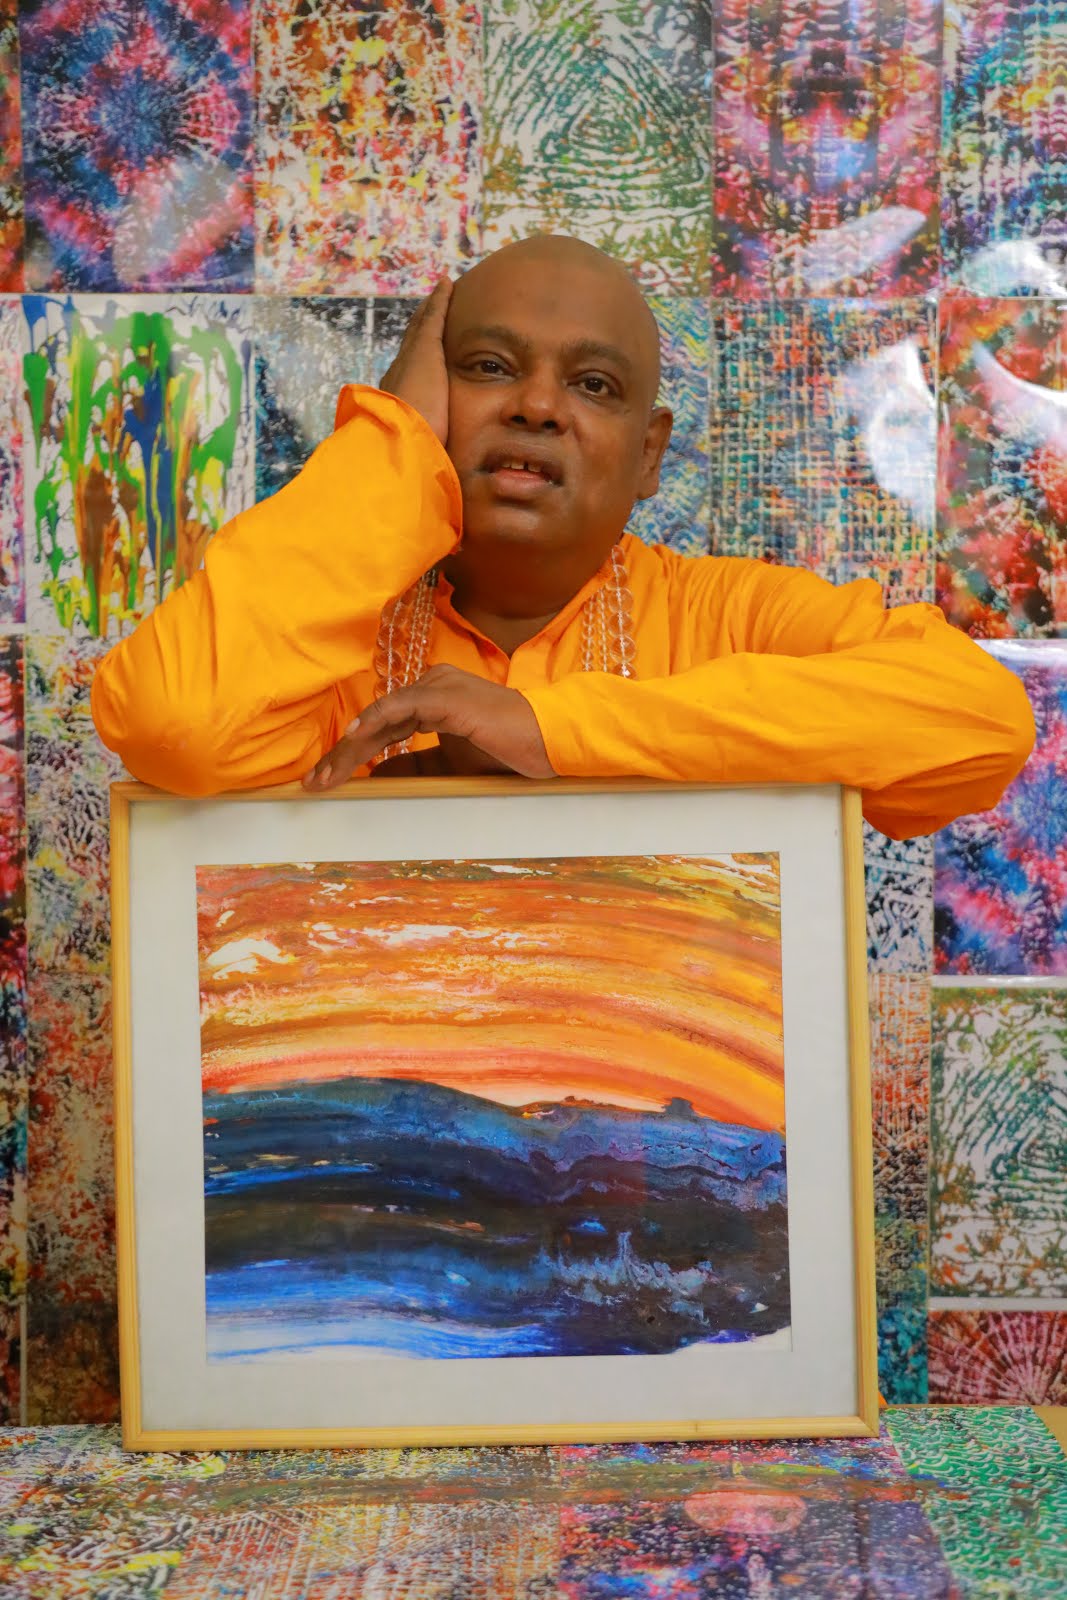 Parijoy Saha with the World's fastest landscape painting.